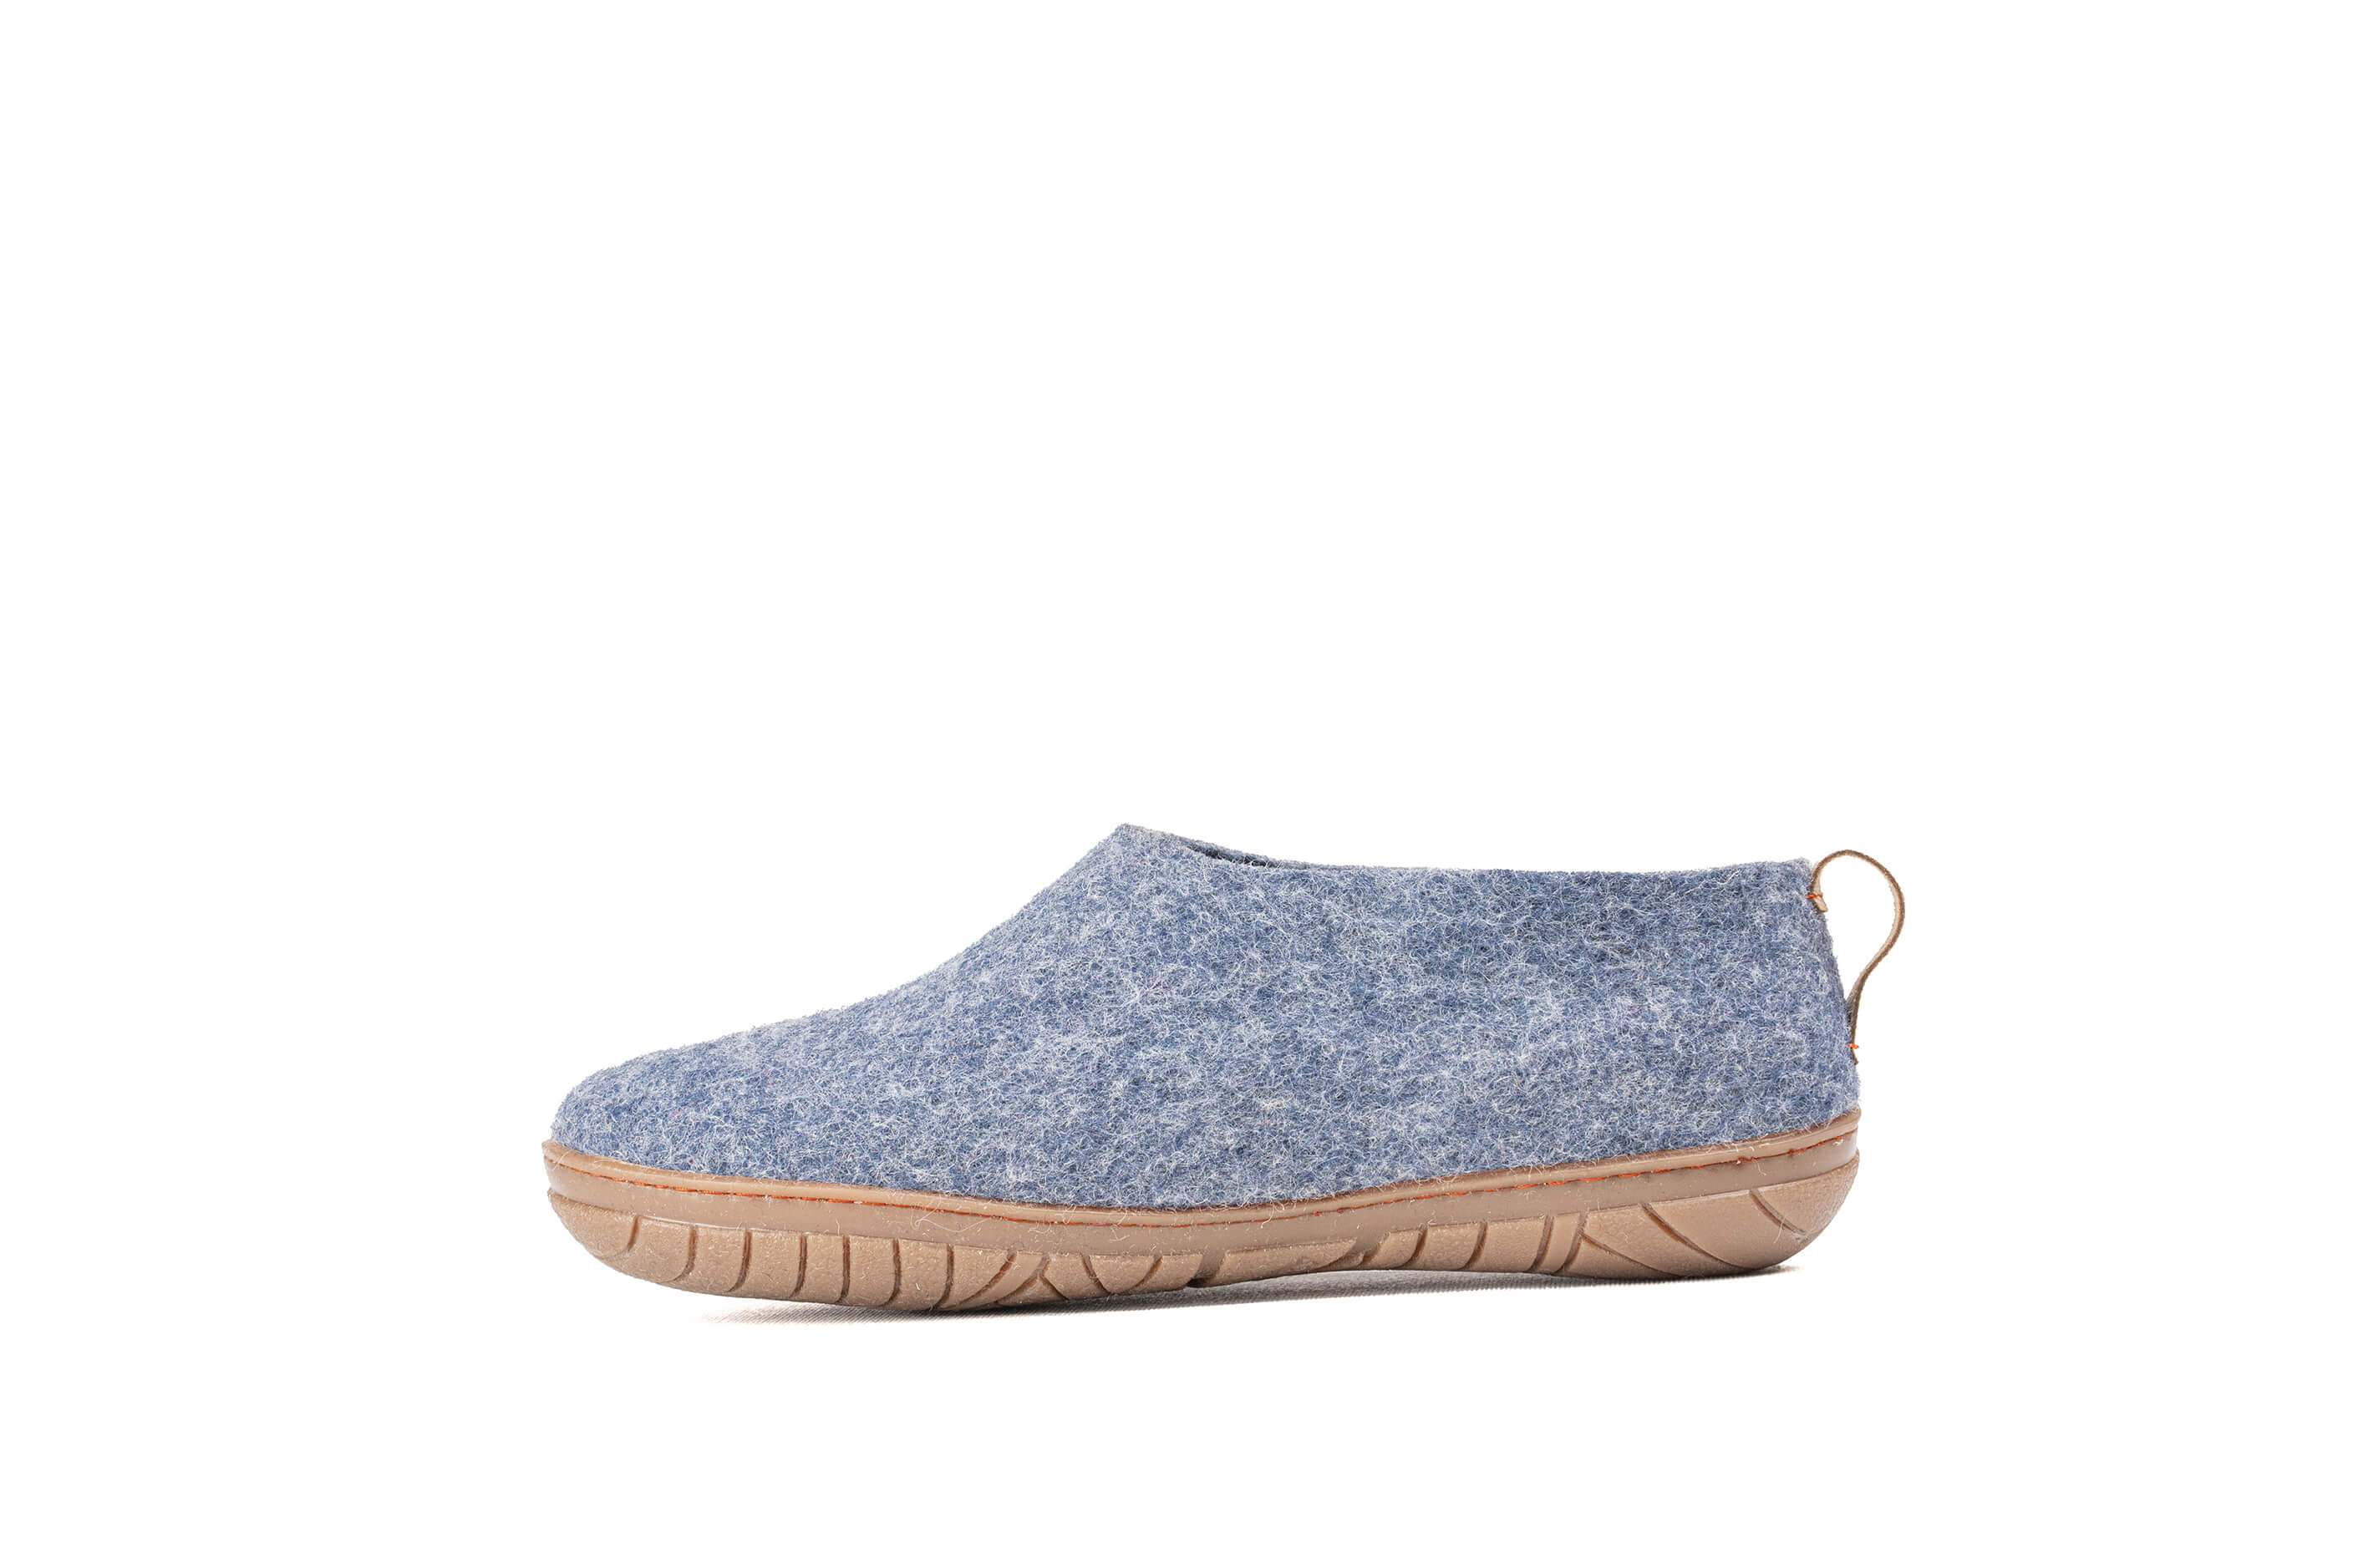 Woollyes Handmade Outdoor Shoes With Rubber Sole - Denim